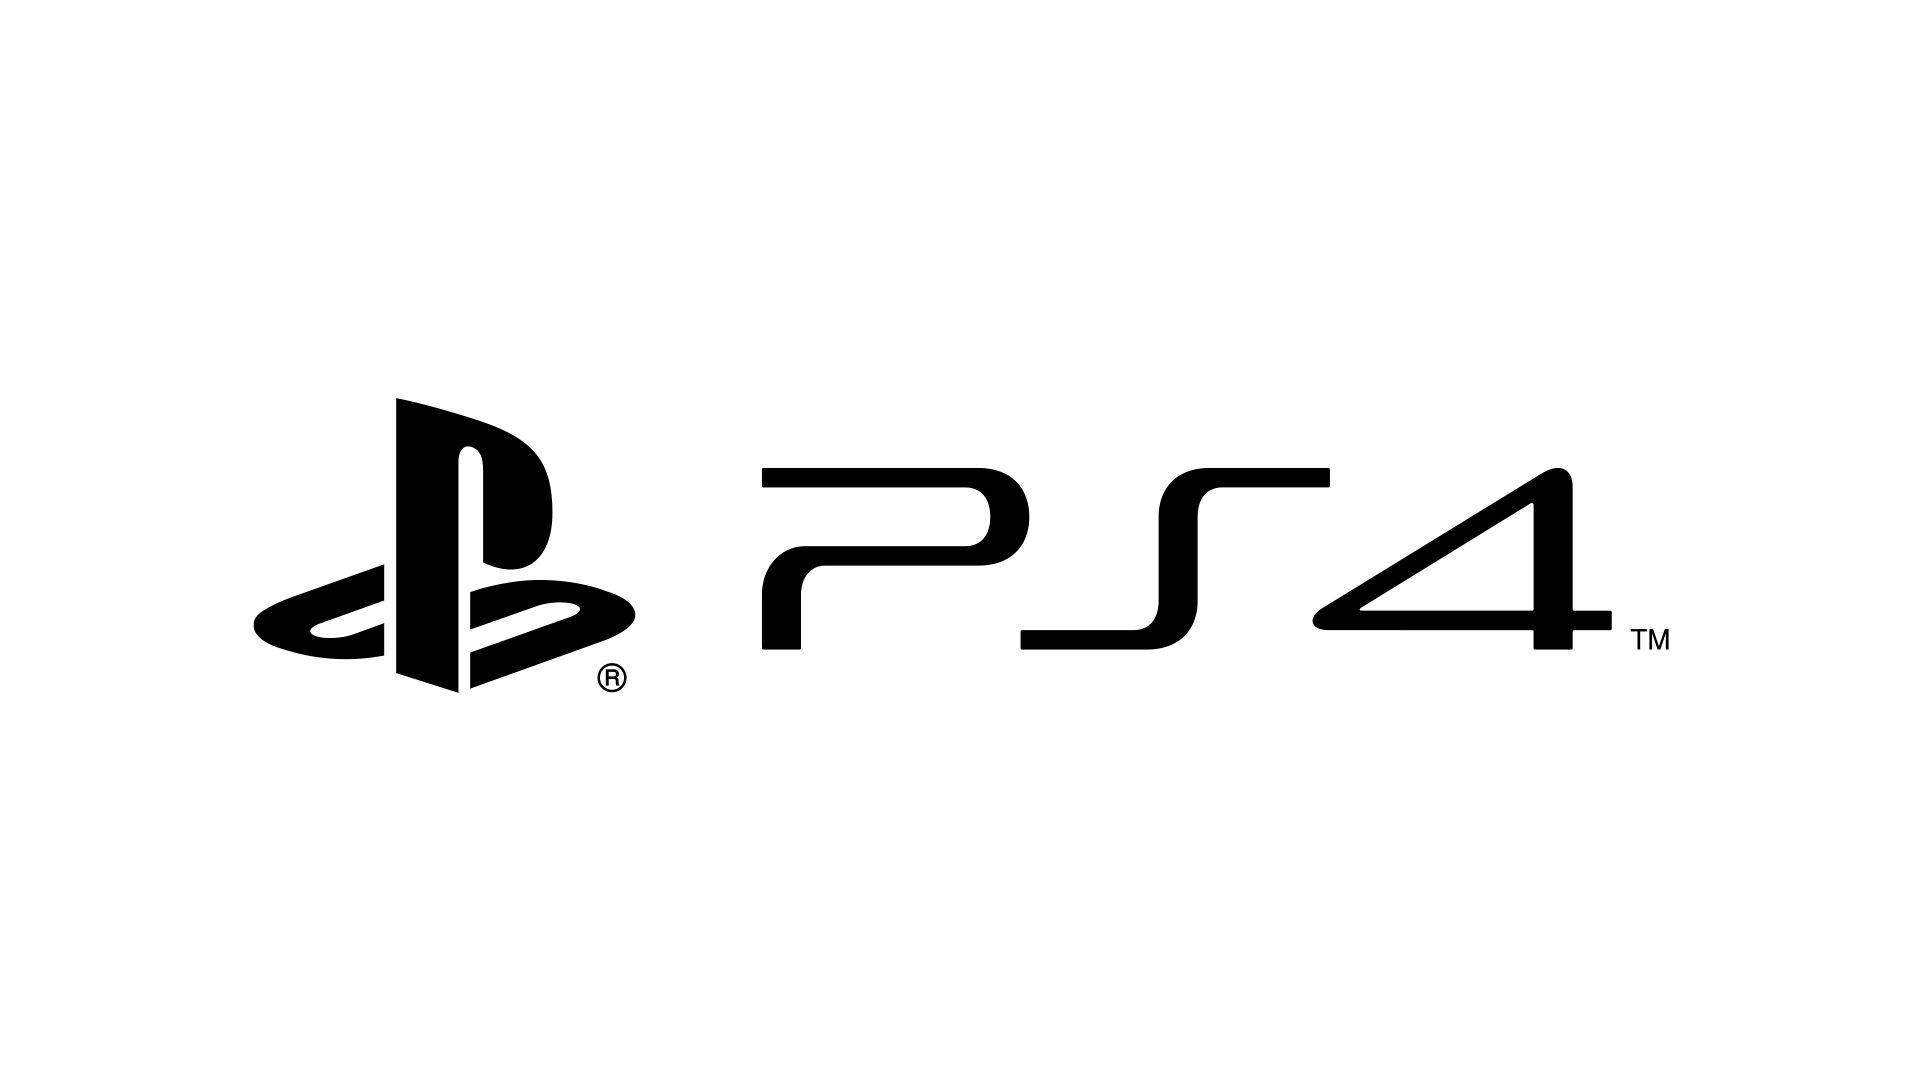 Sony PlayStation 4 Logo - Sony PlayStation 4 Wallpapers, Pictures, Images